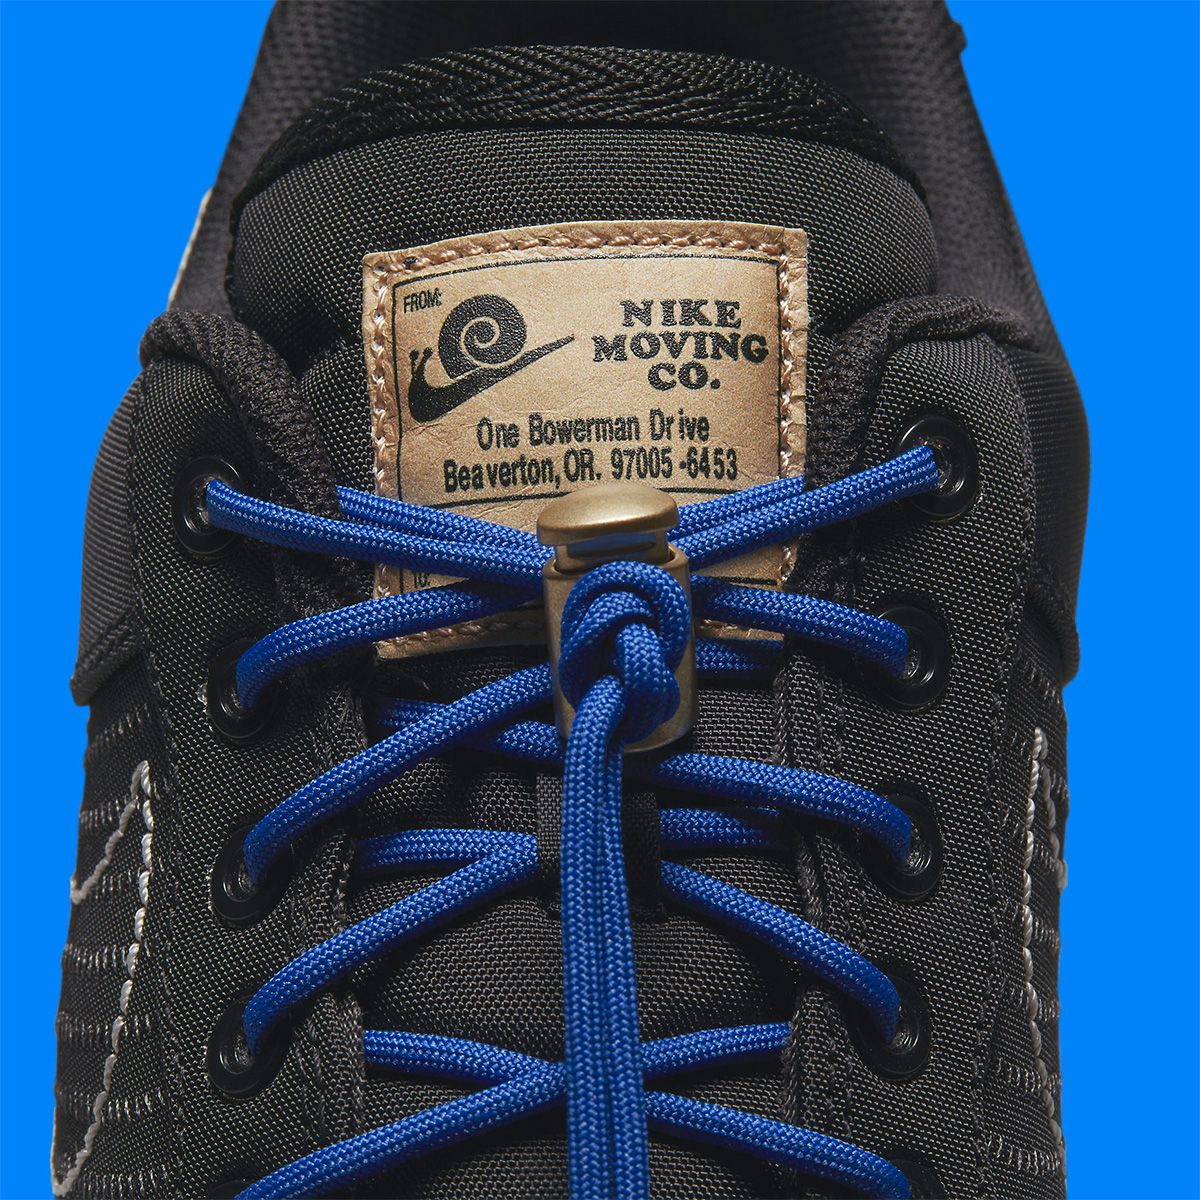 Nike Get Logistical on the Air Force 1 Low “Moving Company” (Black